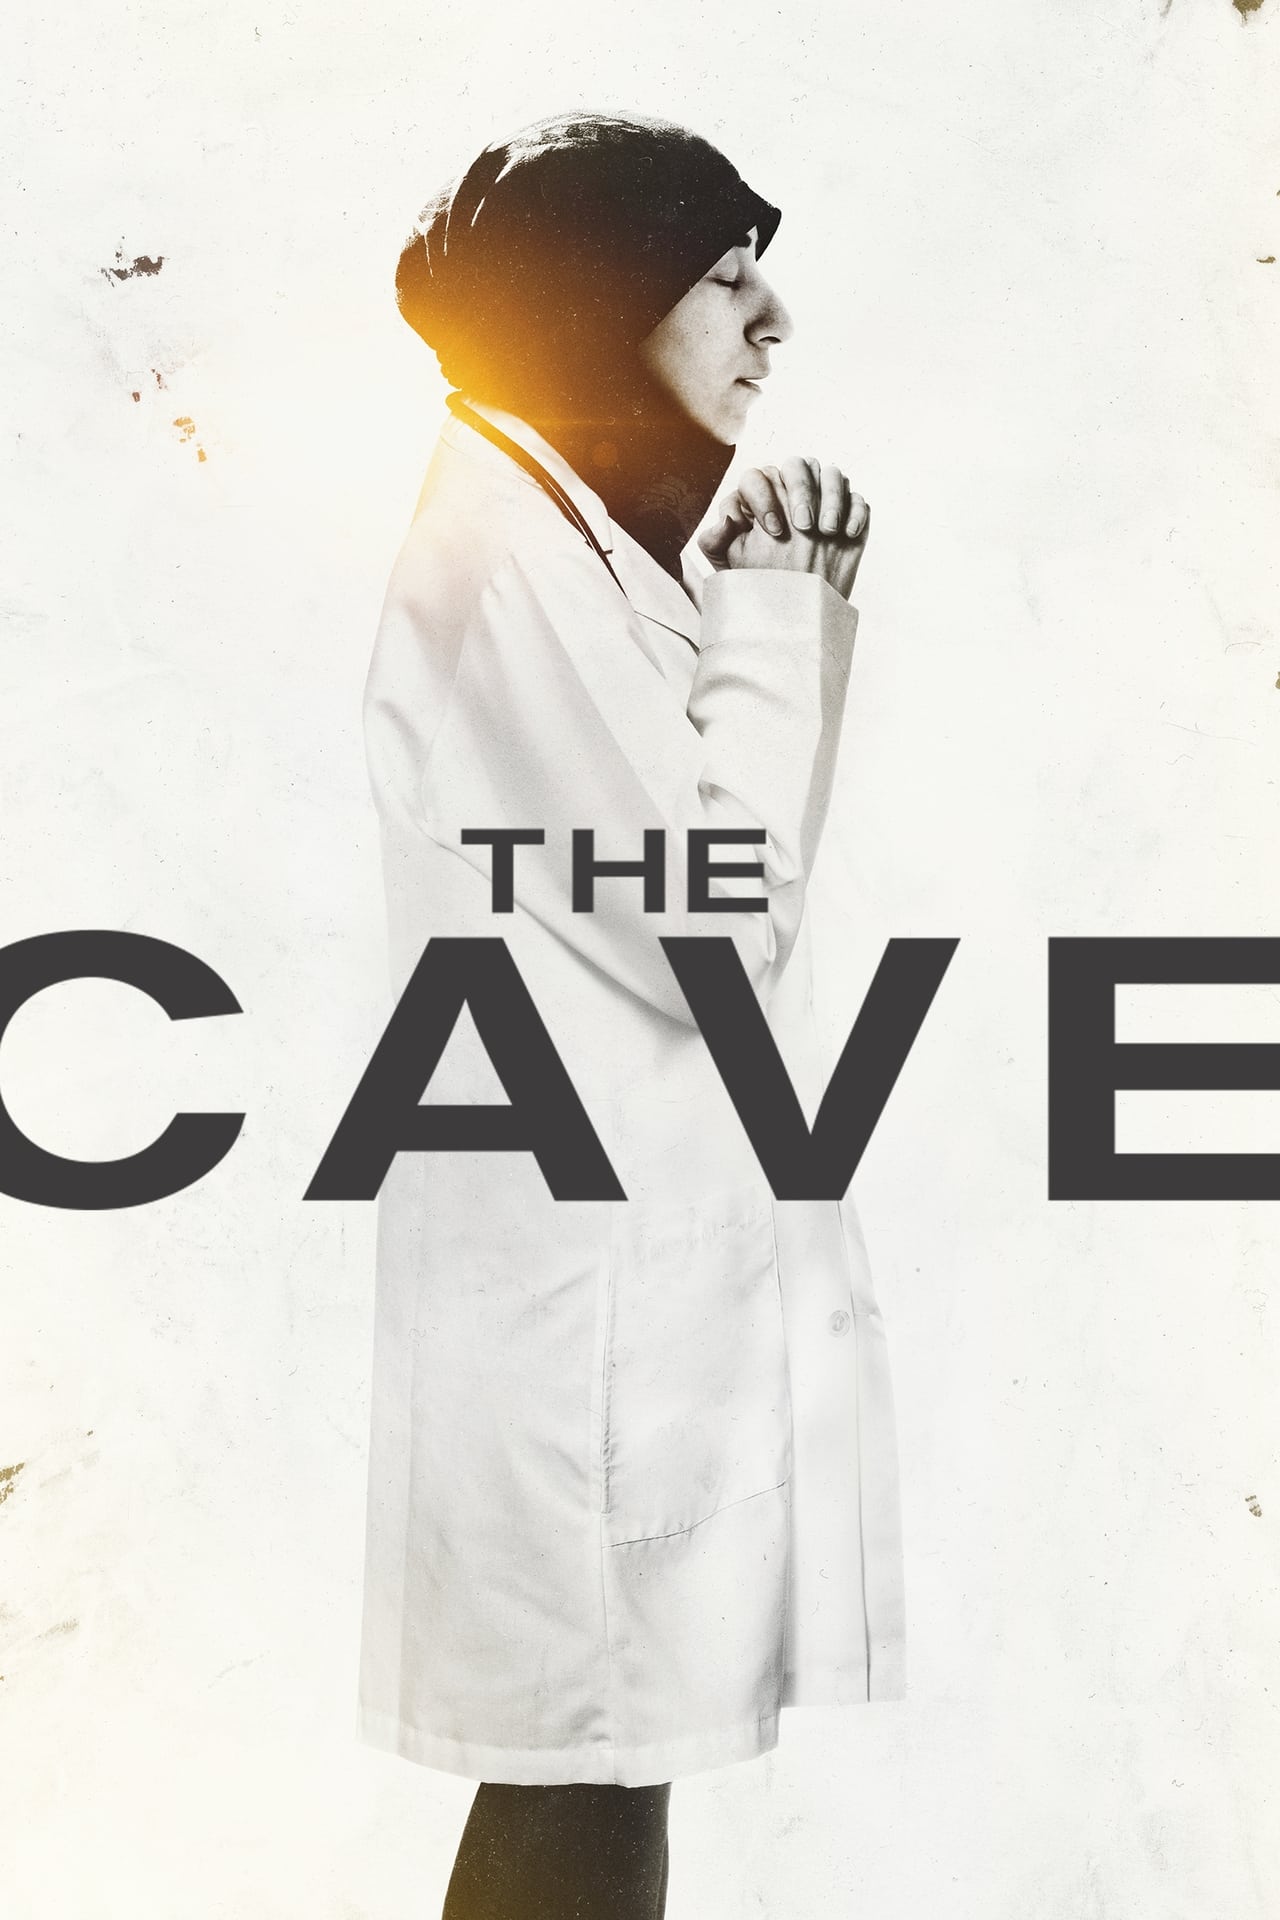 Watch The Cave (2019) Full Movie Online Free | GOLD.STREAM-25.ORG1280 x 1920